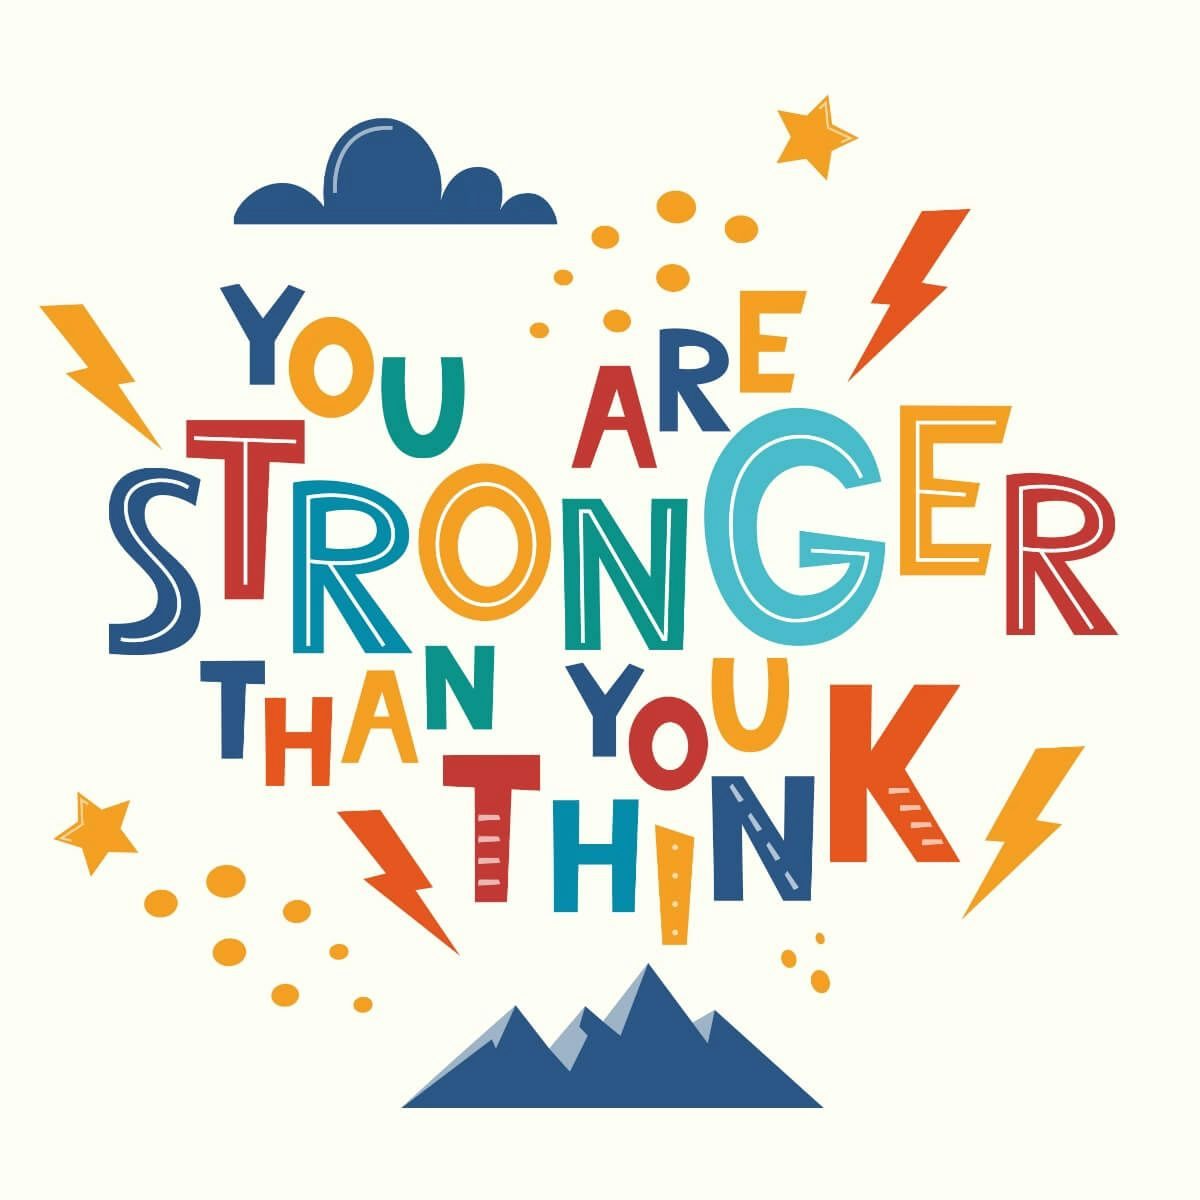 Card You are stronger than you think